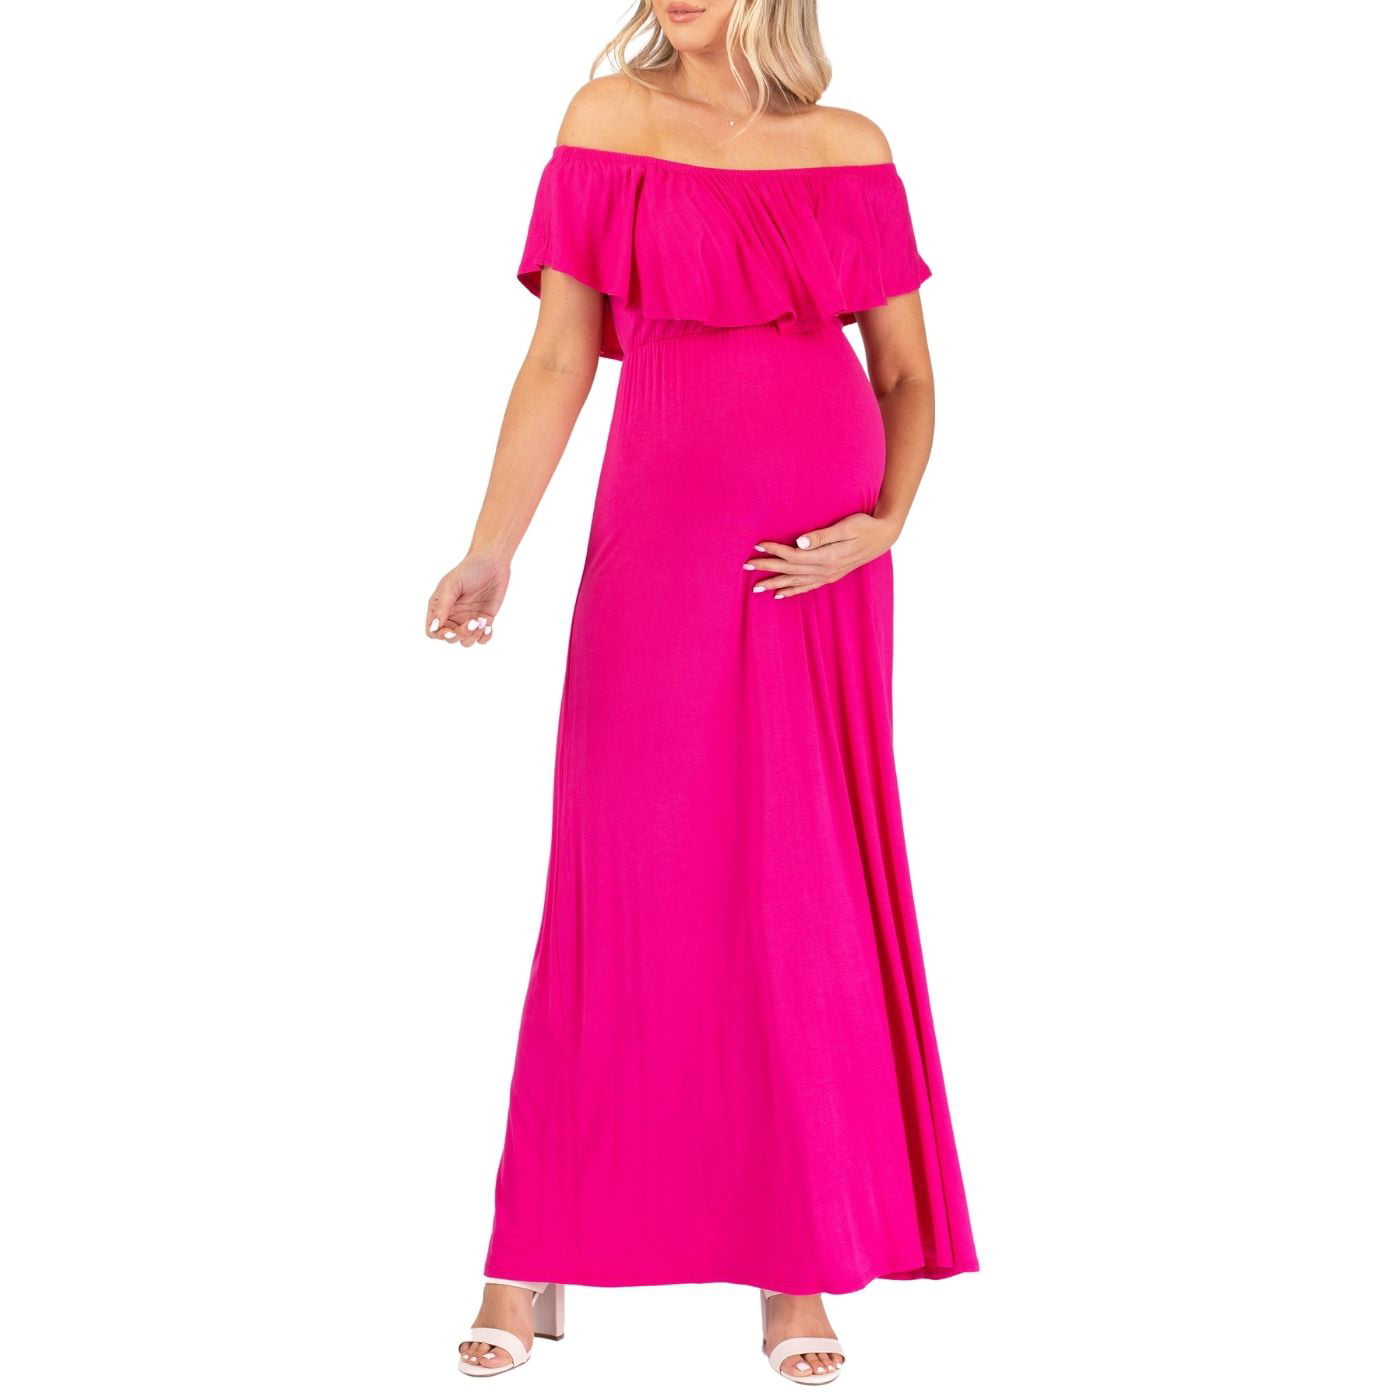 Mother Bee Maternity Open Shoulder Dress with Ruffles 